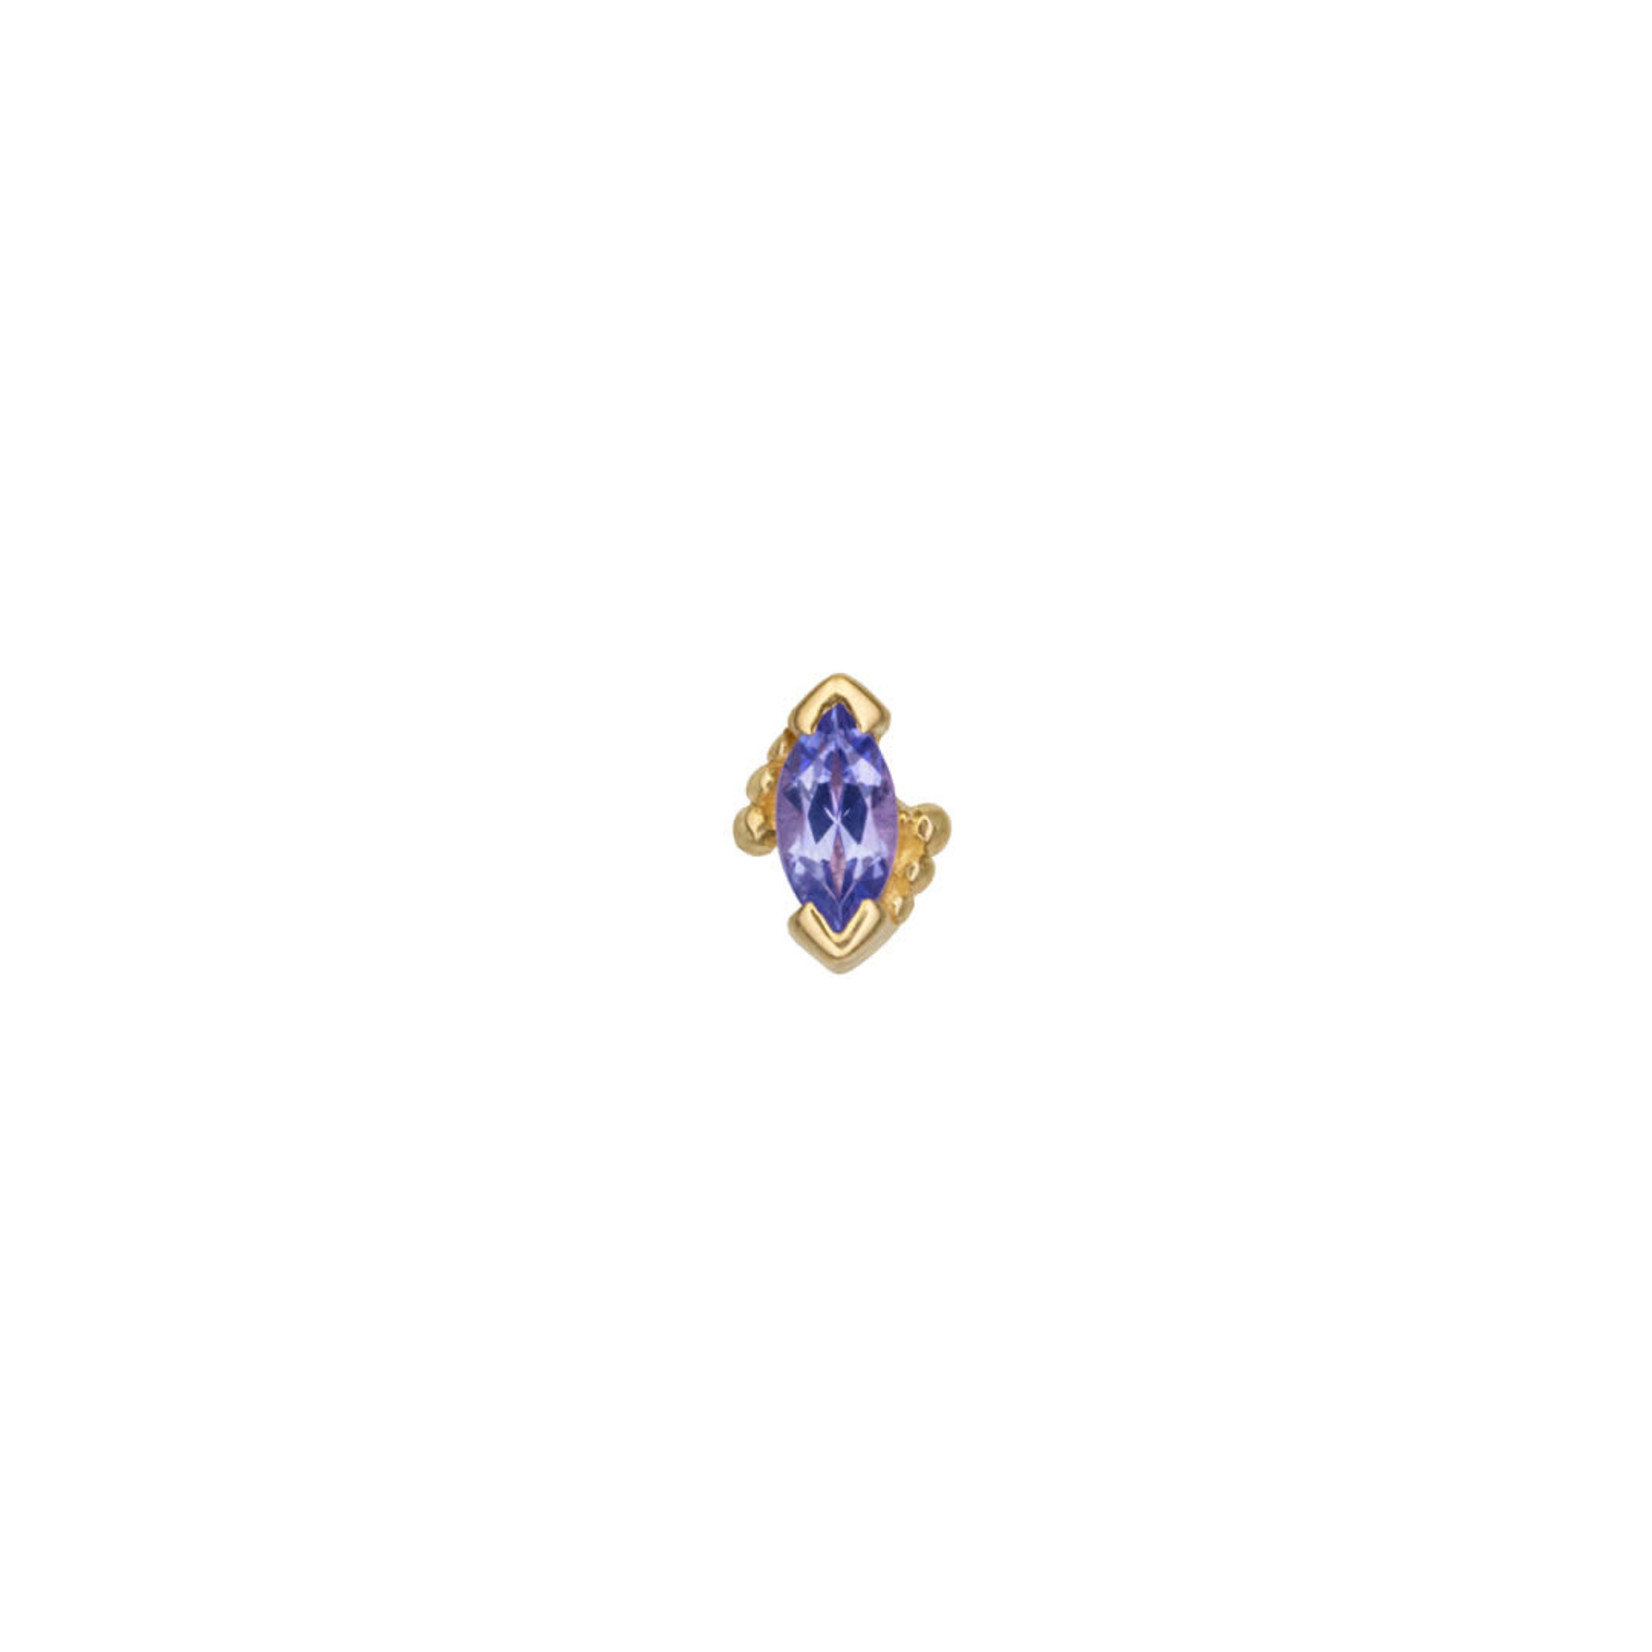 BVLA BVLA "Beaded Marquise" press-fit end with 4x2 AA Tanzanite